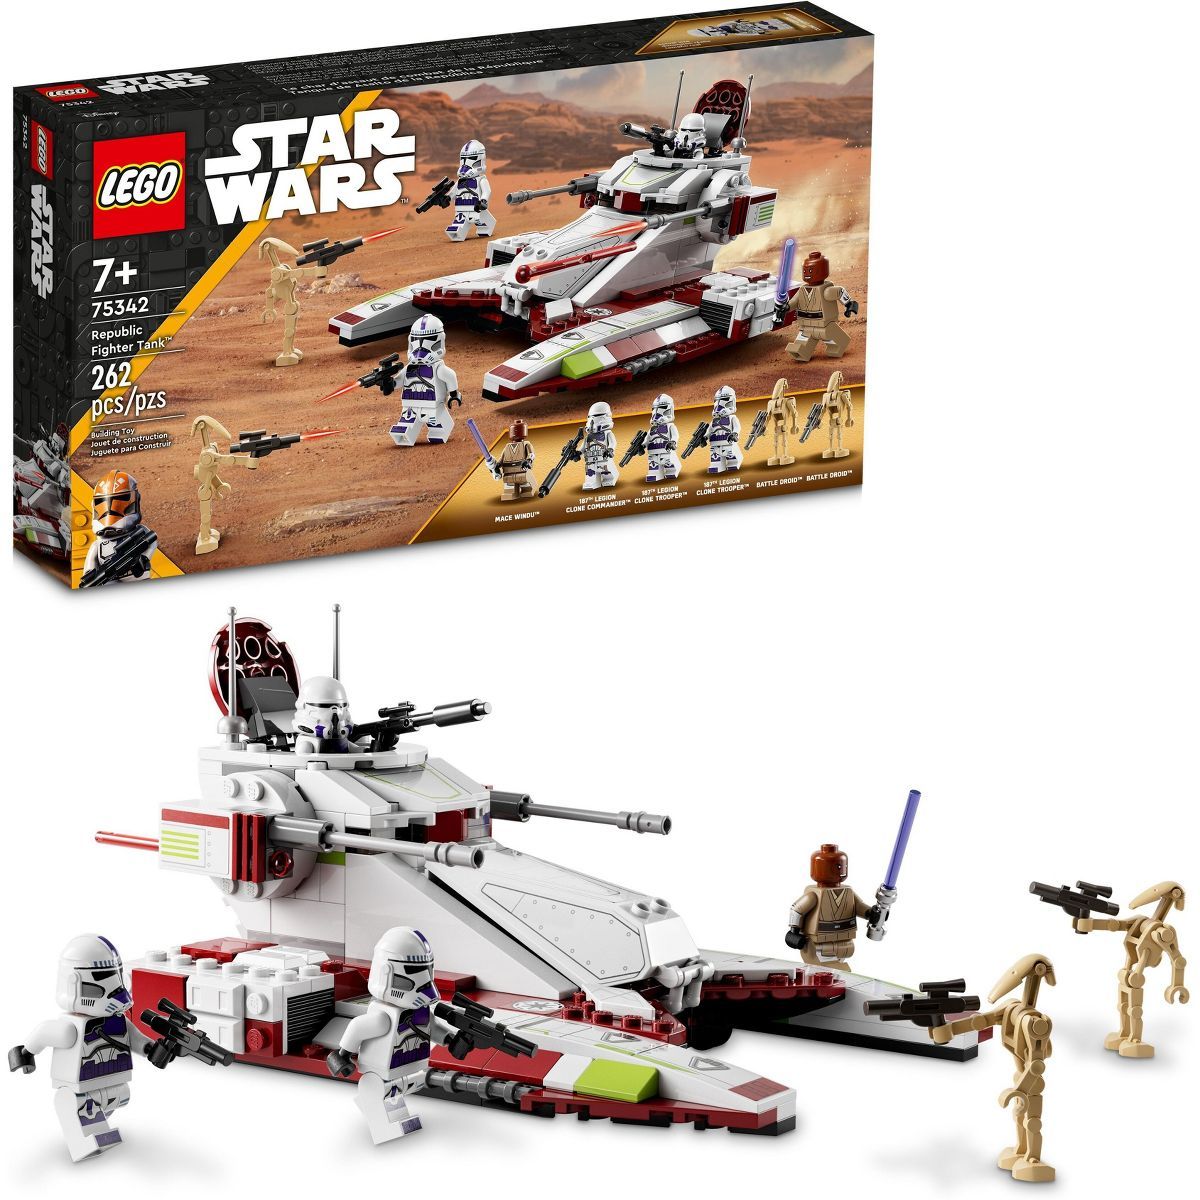 LEGO Star Wars Republic Fighter Tank Buildable Toy 75342 | Target